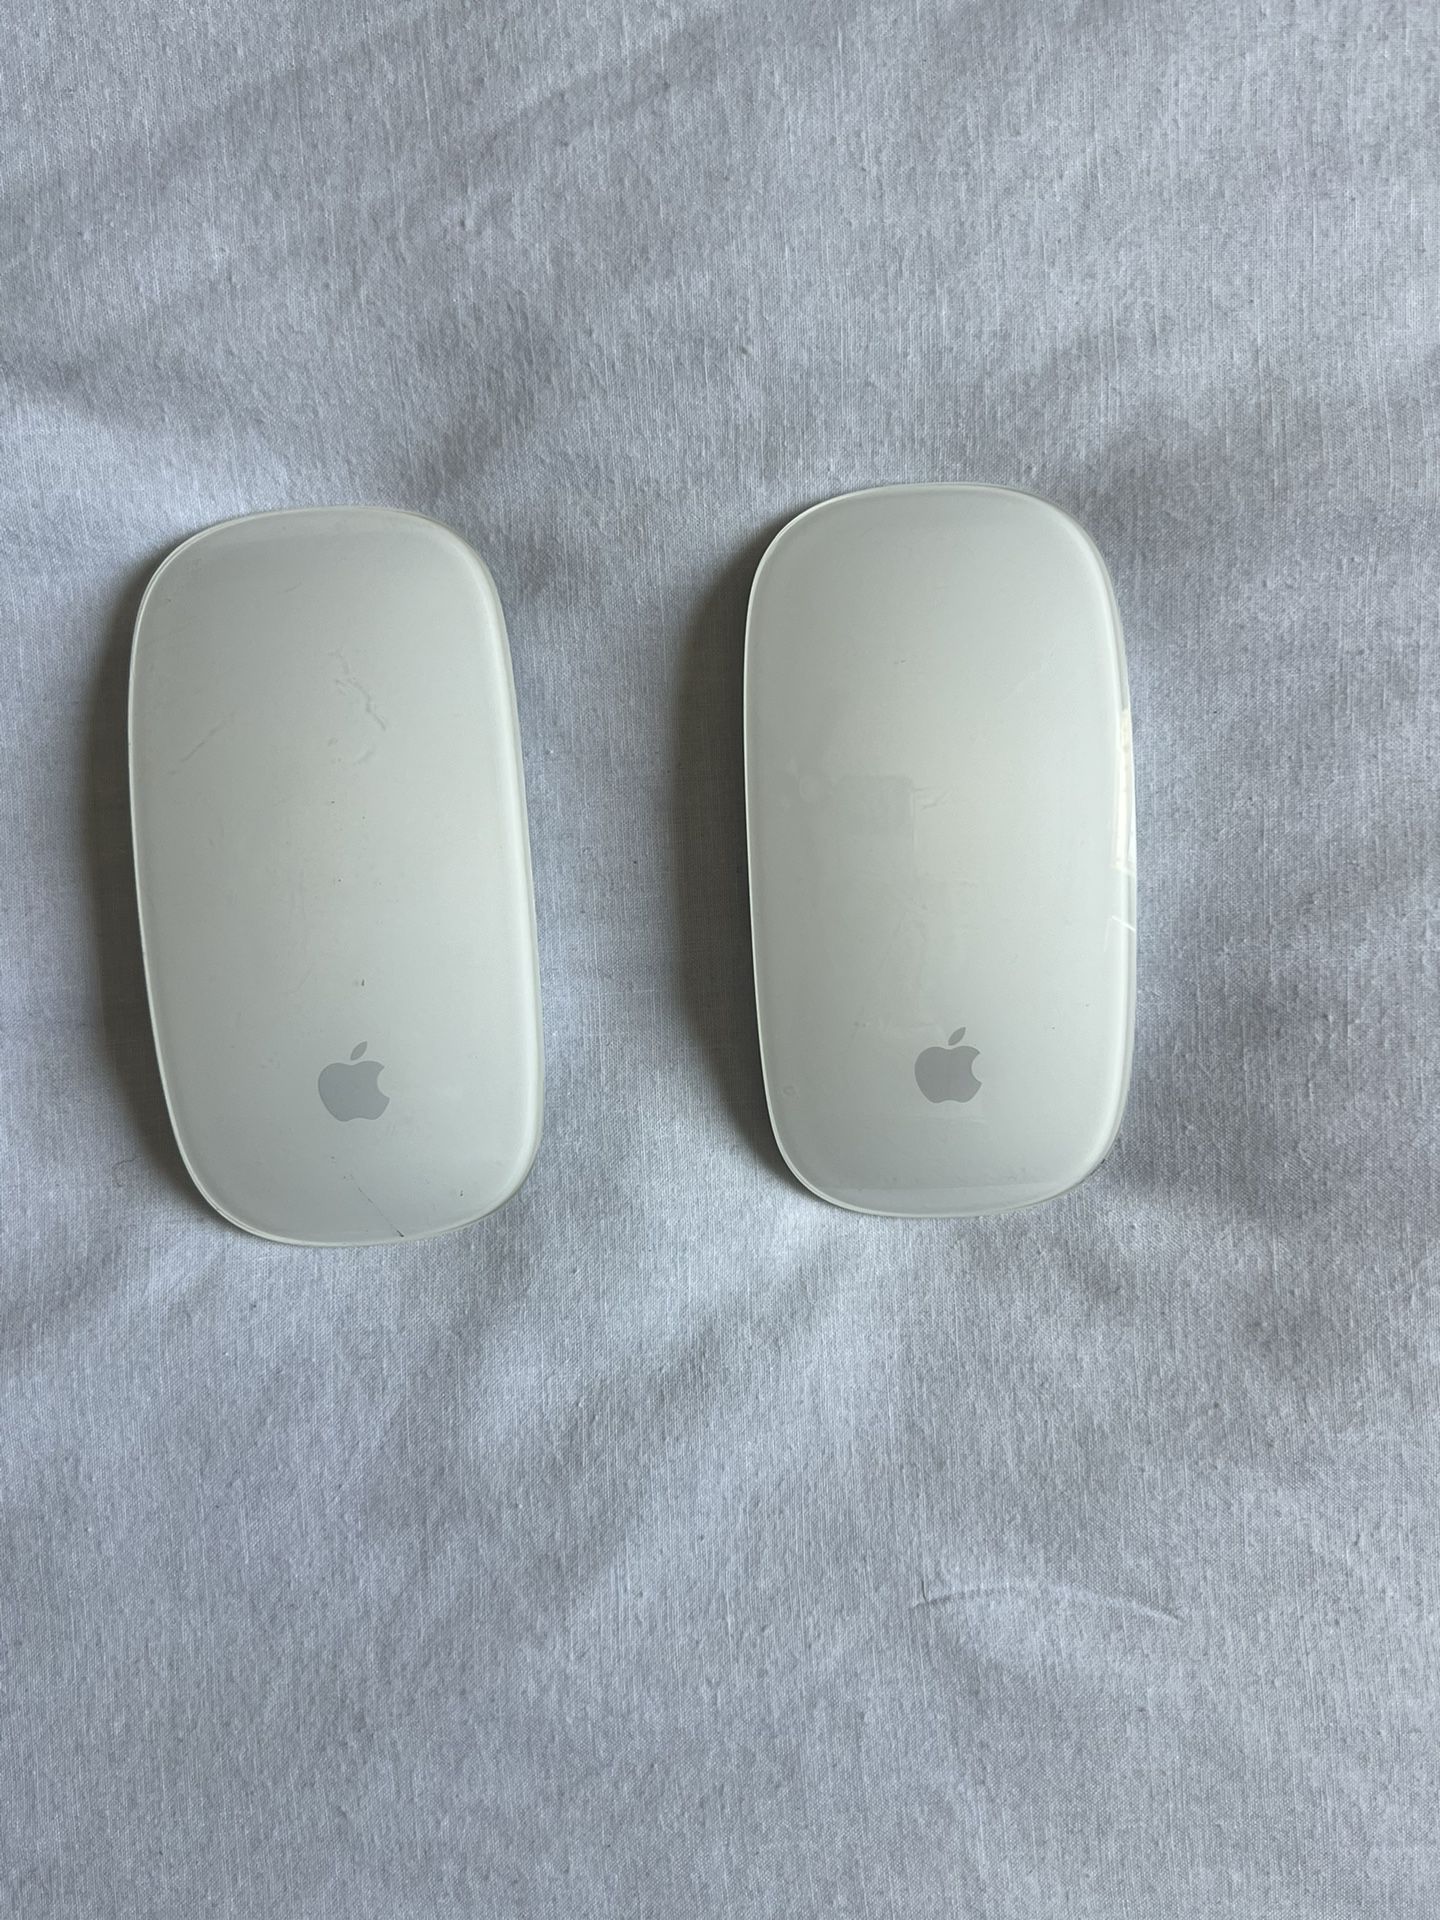 Wireless Apple Mouse